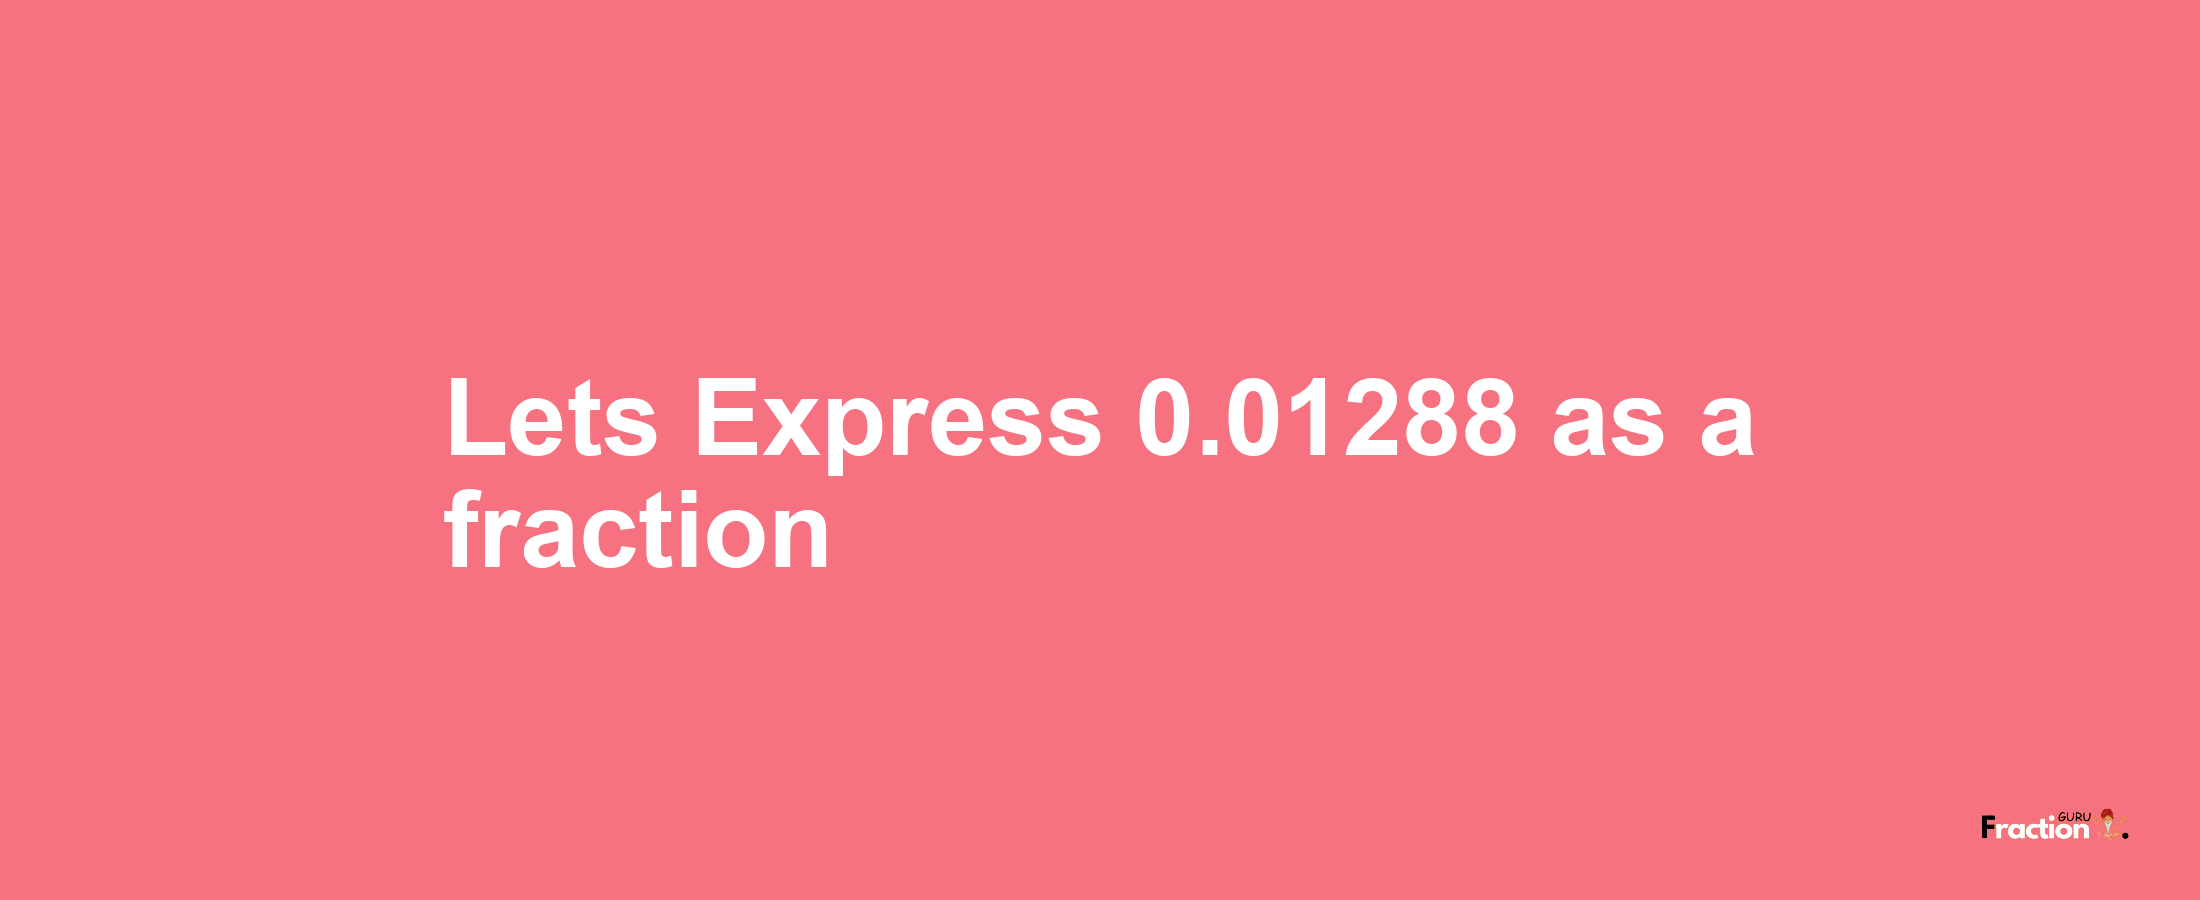 Lets Express 0.01288 as afraction